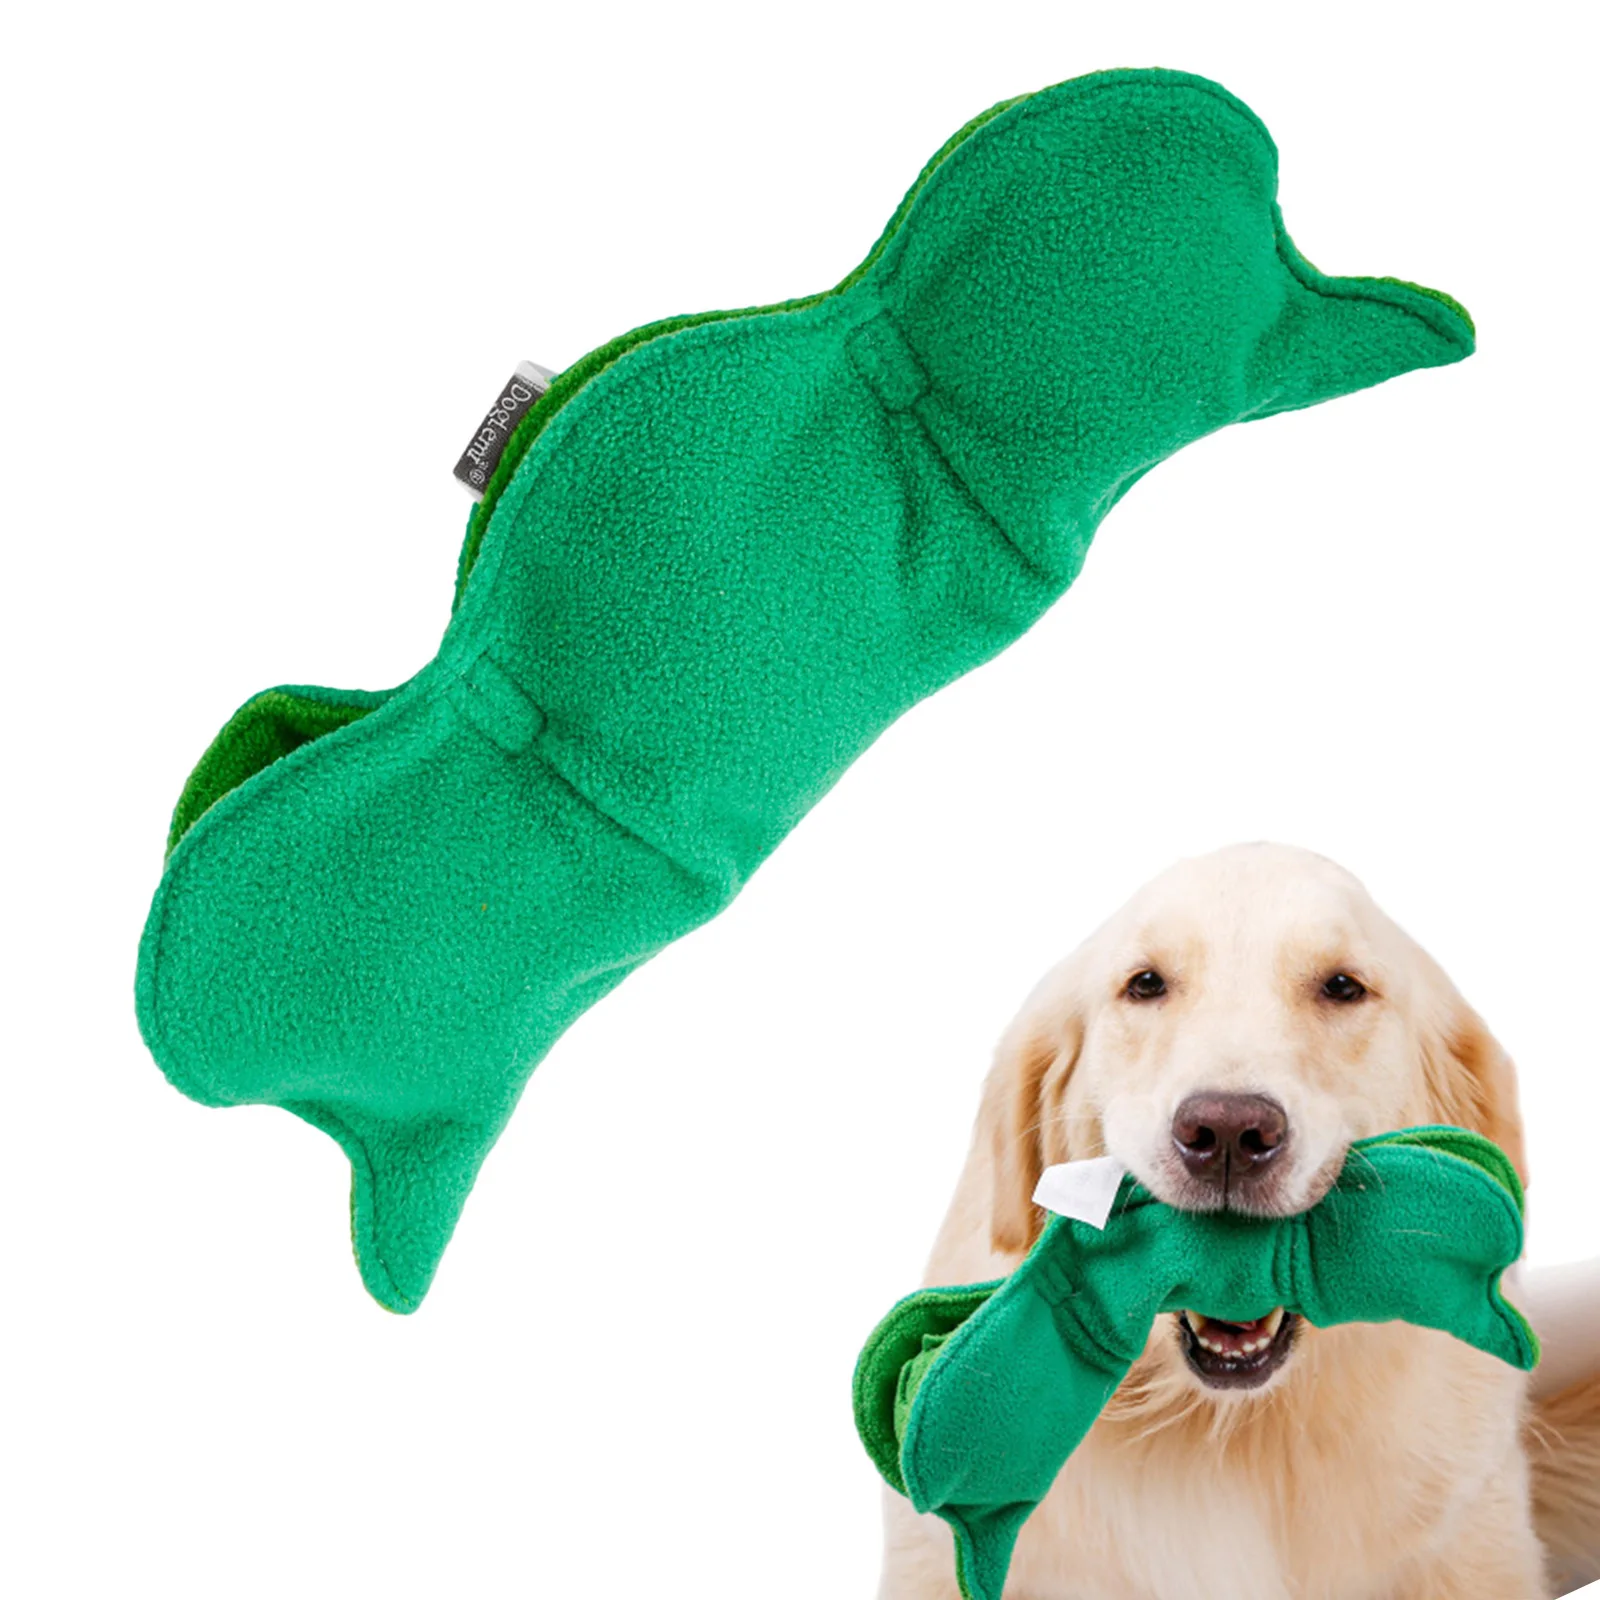 Cute Safe Dog Chew Toys for Aggressive Chewers Tough Durable Squeaky Fetch Play Balls Interactive Dog Toys for Puppy Molar Puppy